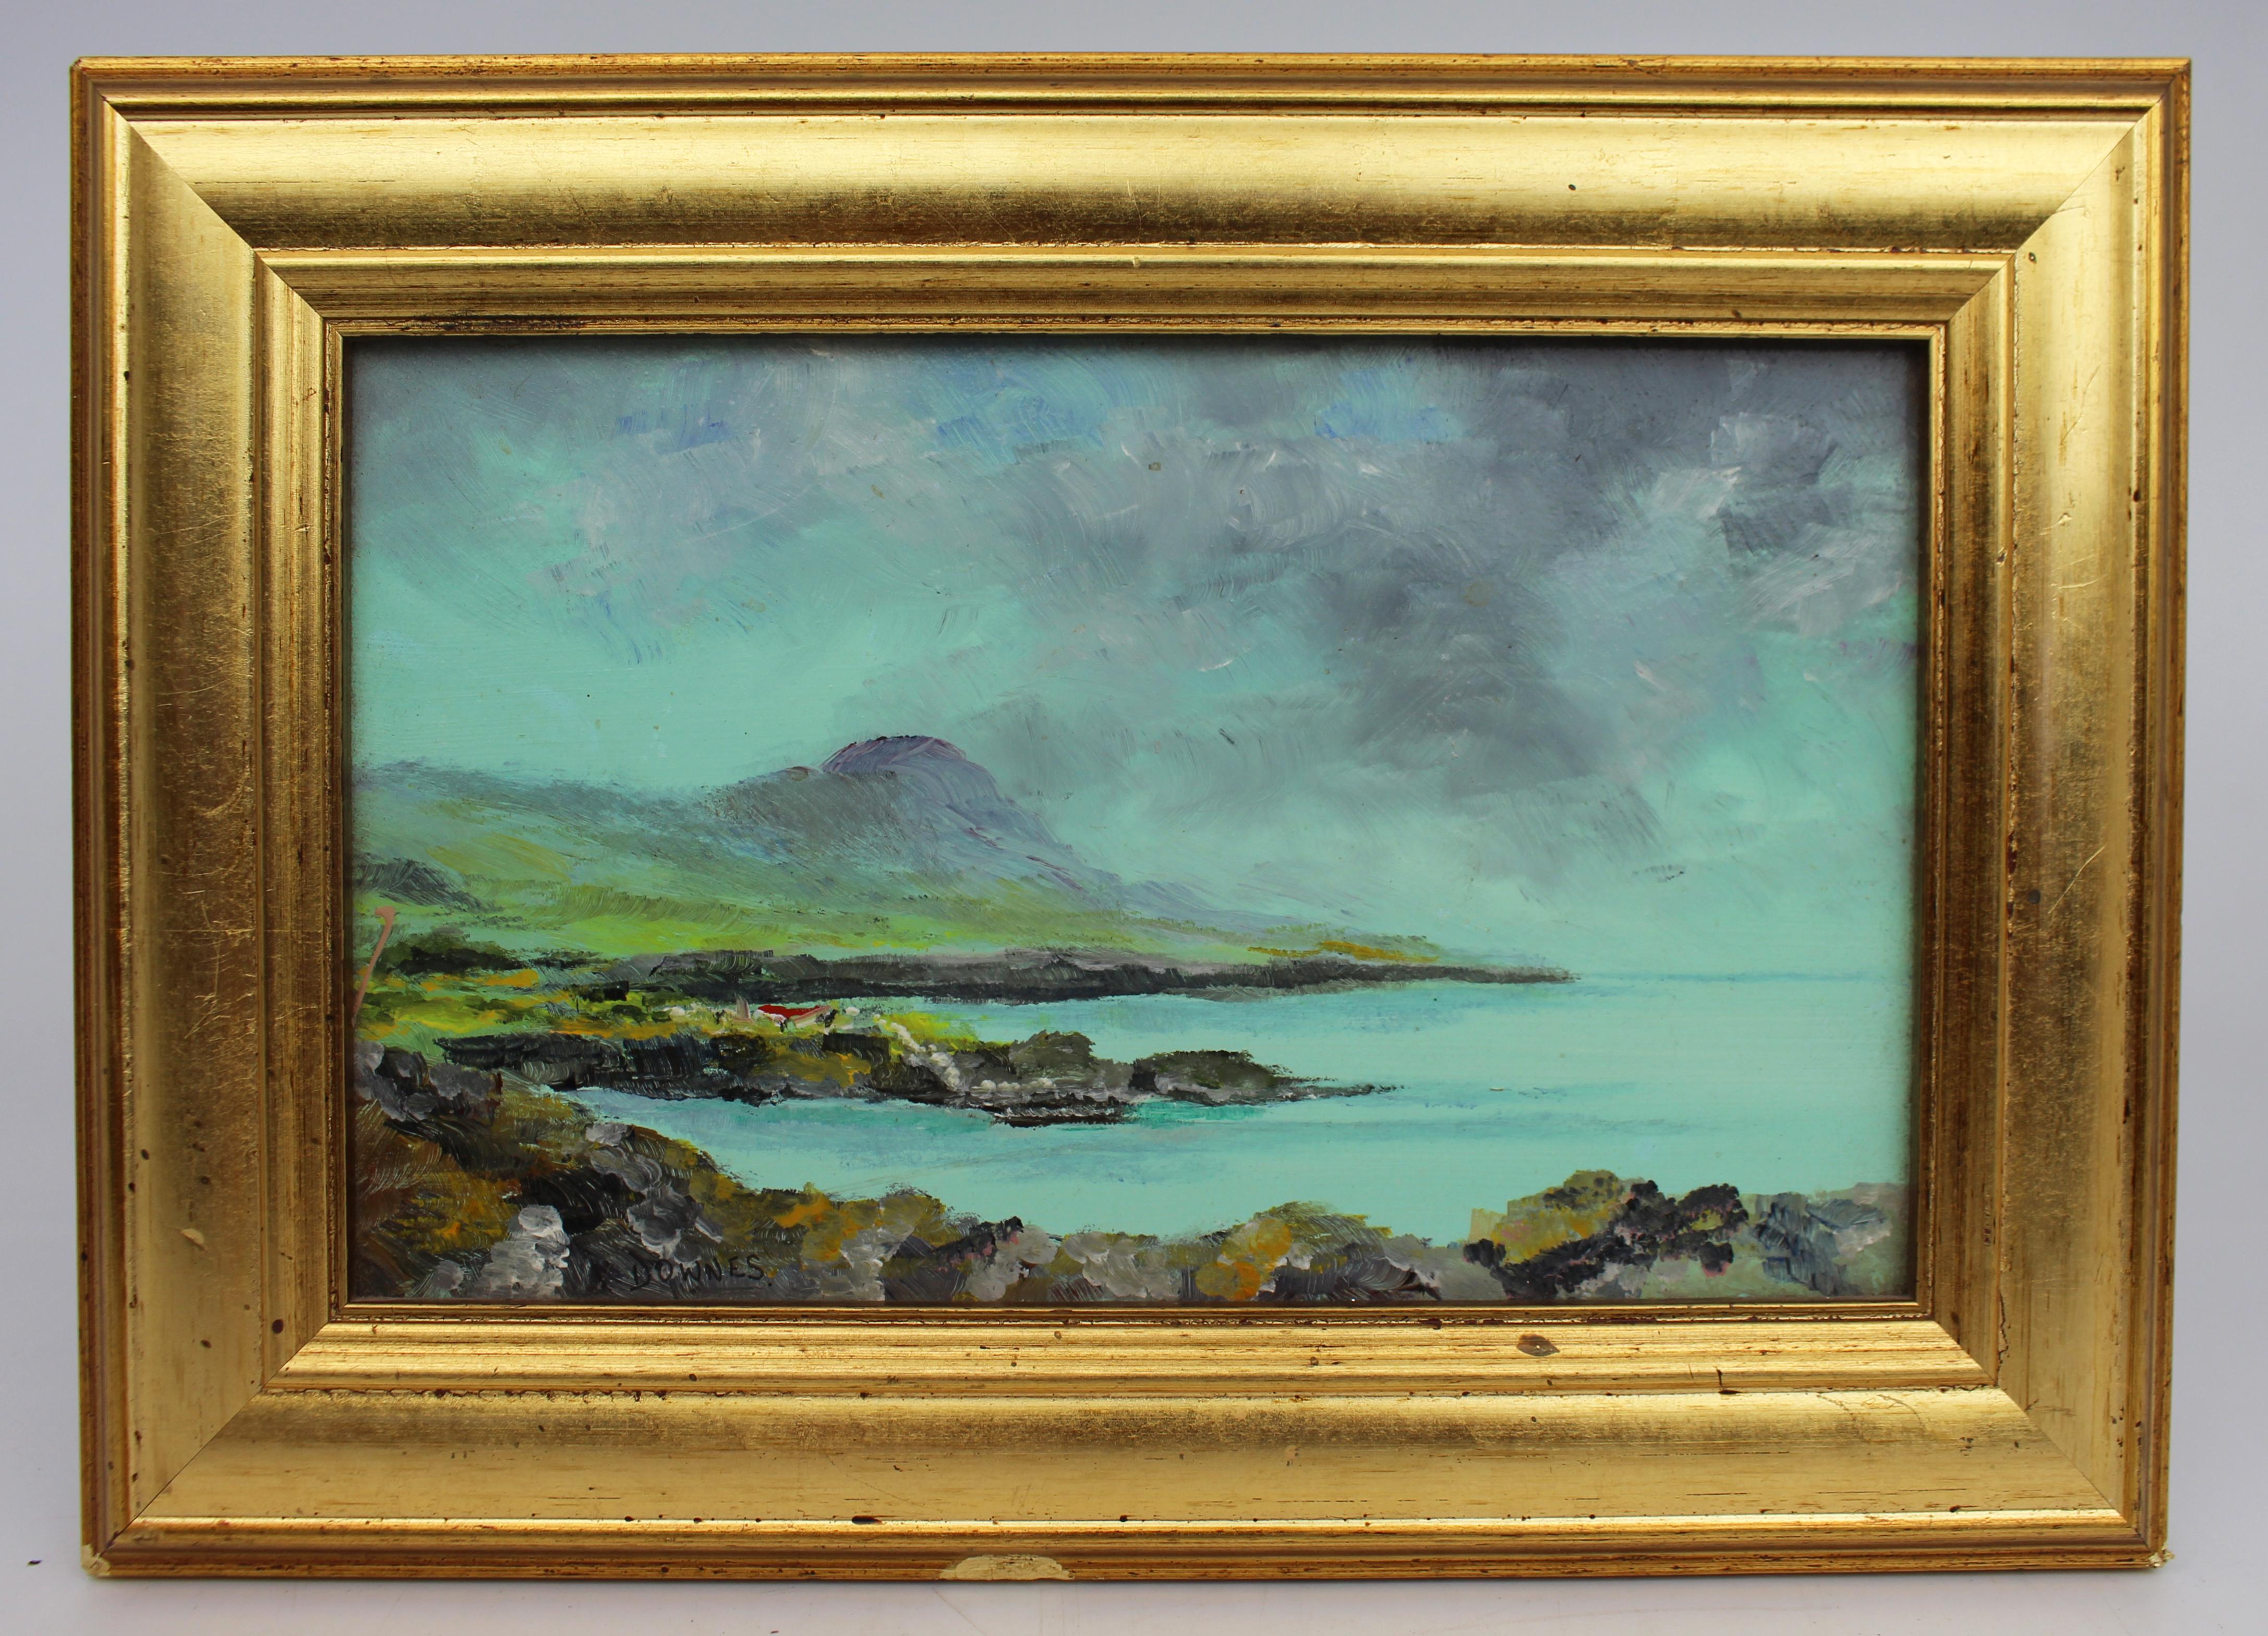 Irish Landscape by Michael F. Downes Oil on Board. 


Fine and delicate late 20th century artwork by Michael F.Downes.

Frame measures 27 x 19 cm

Good condition. Little wear to frame and touch-up to gold leaf 

Michael F. Downes is a well known